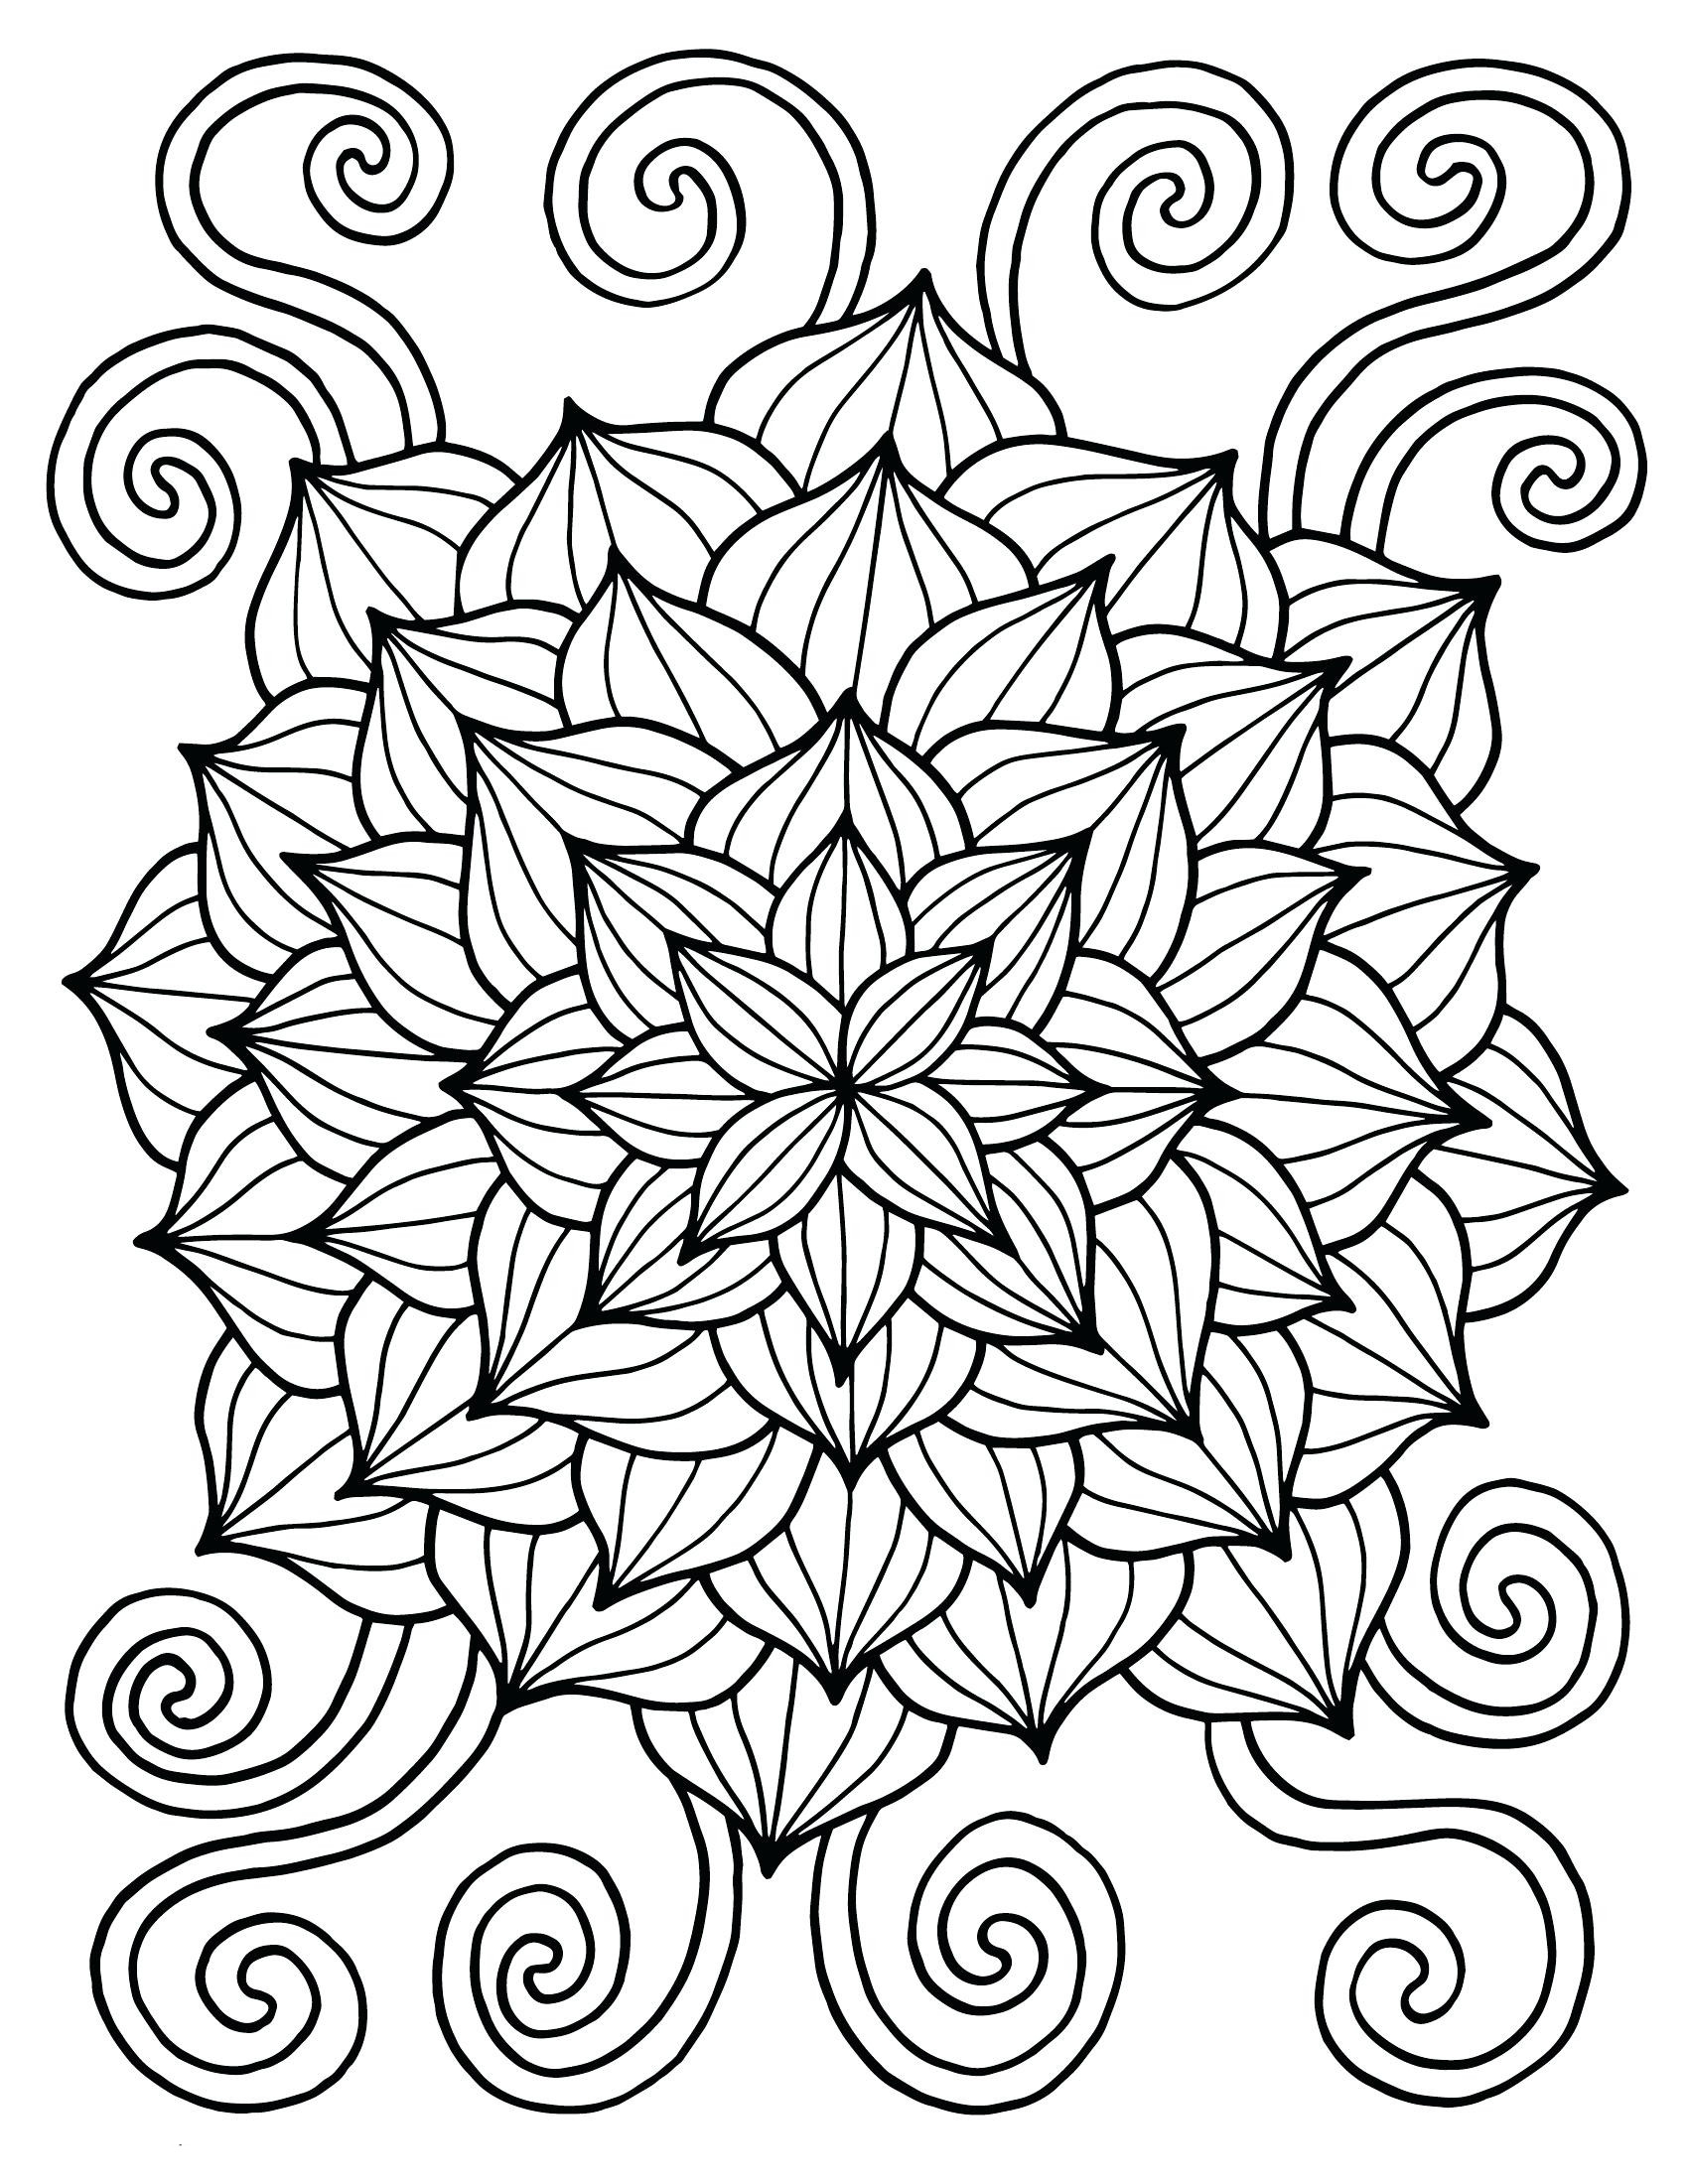 Printable Flower Coloring Pages For Kids
 Spring Coloring Pages Best Coloring Pages For Kids